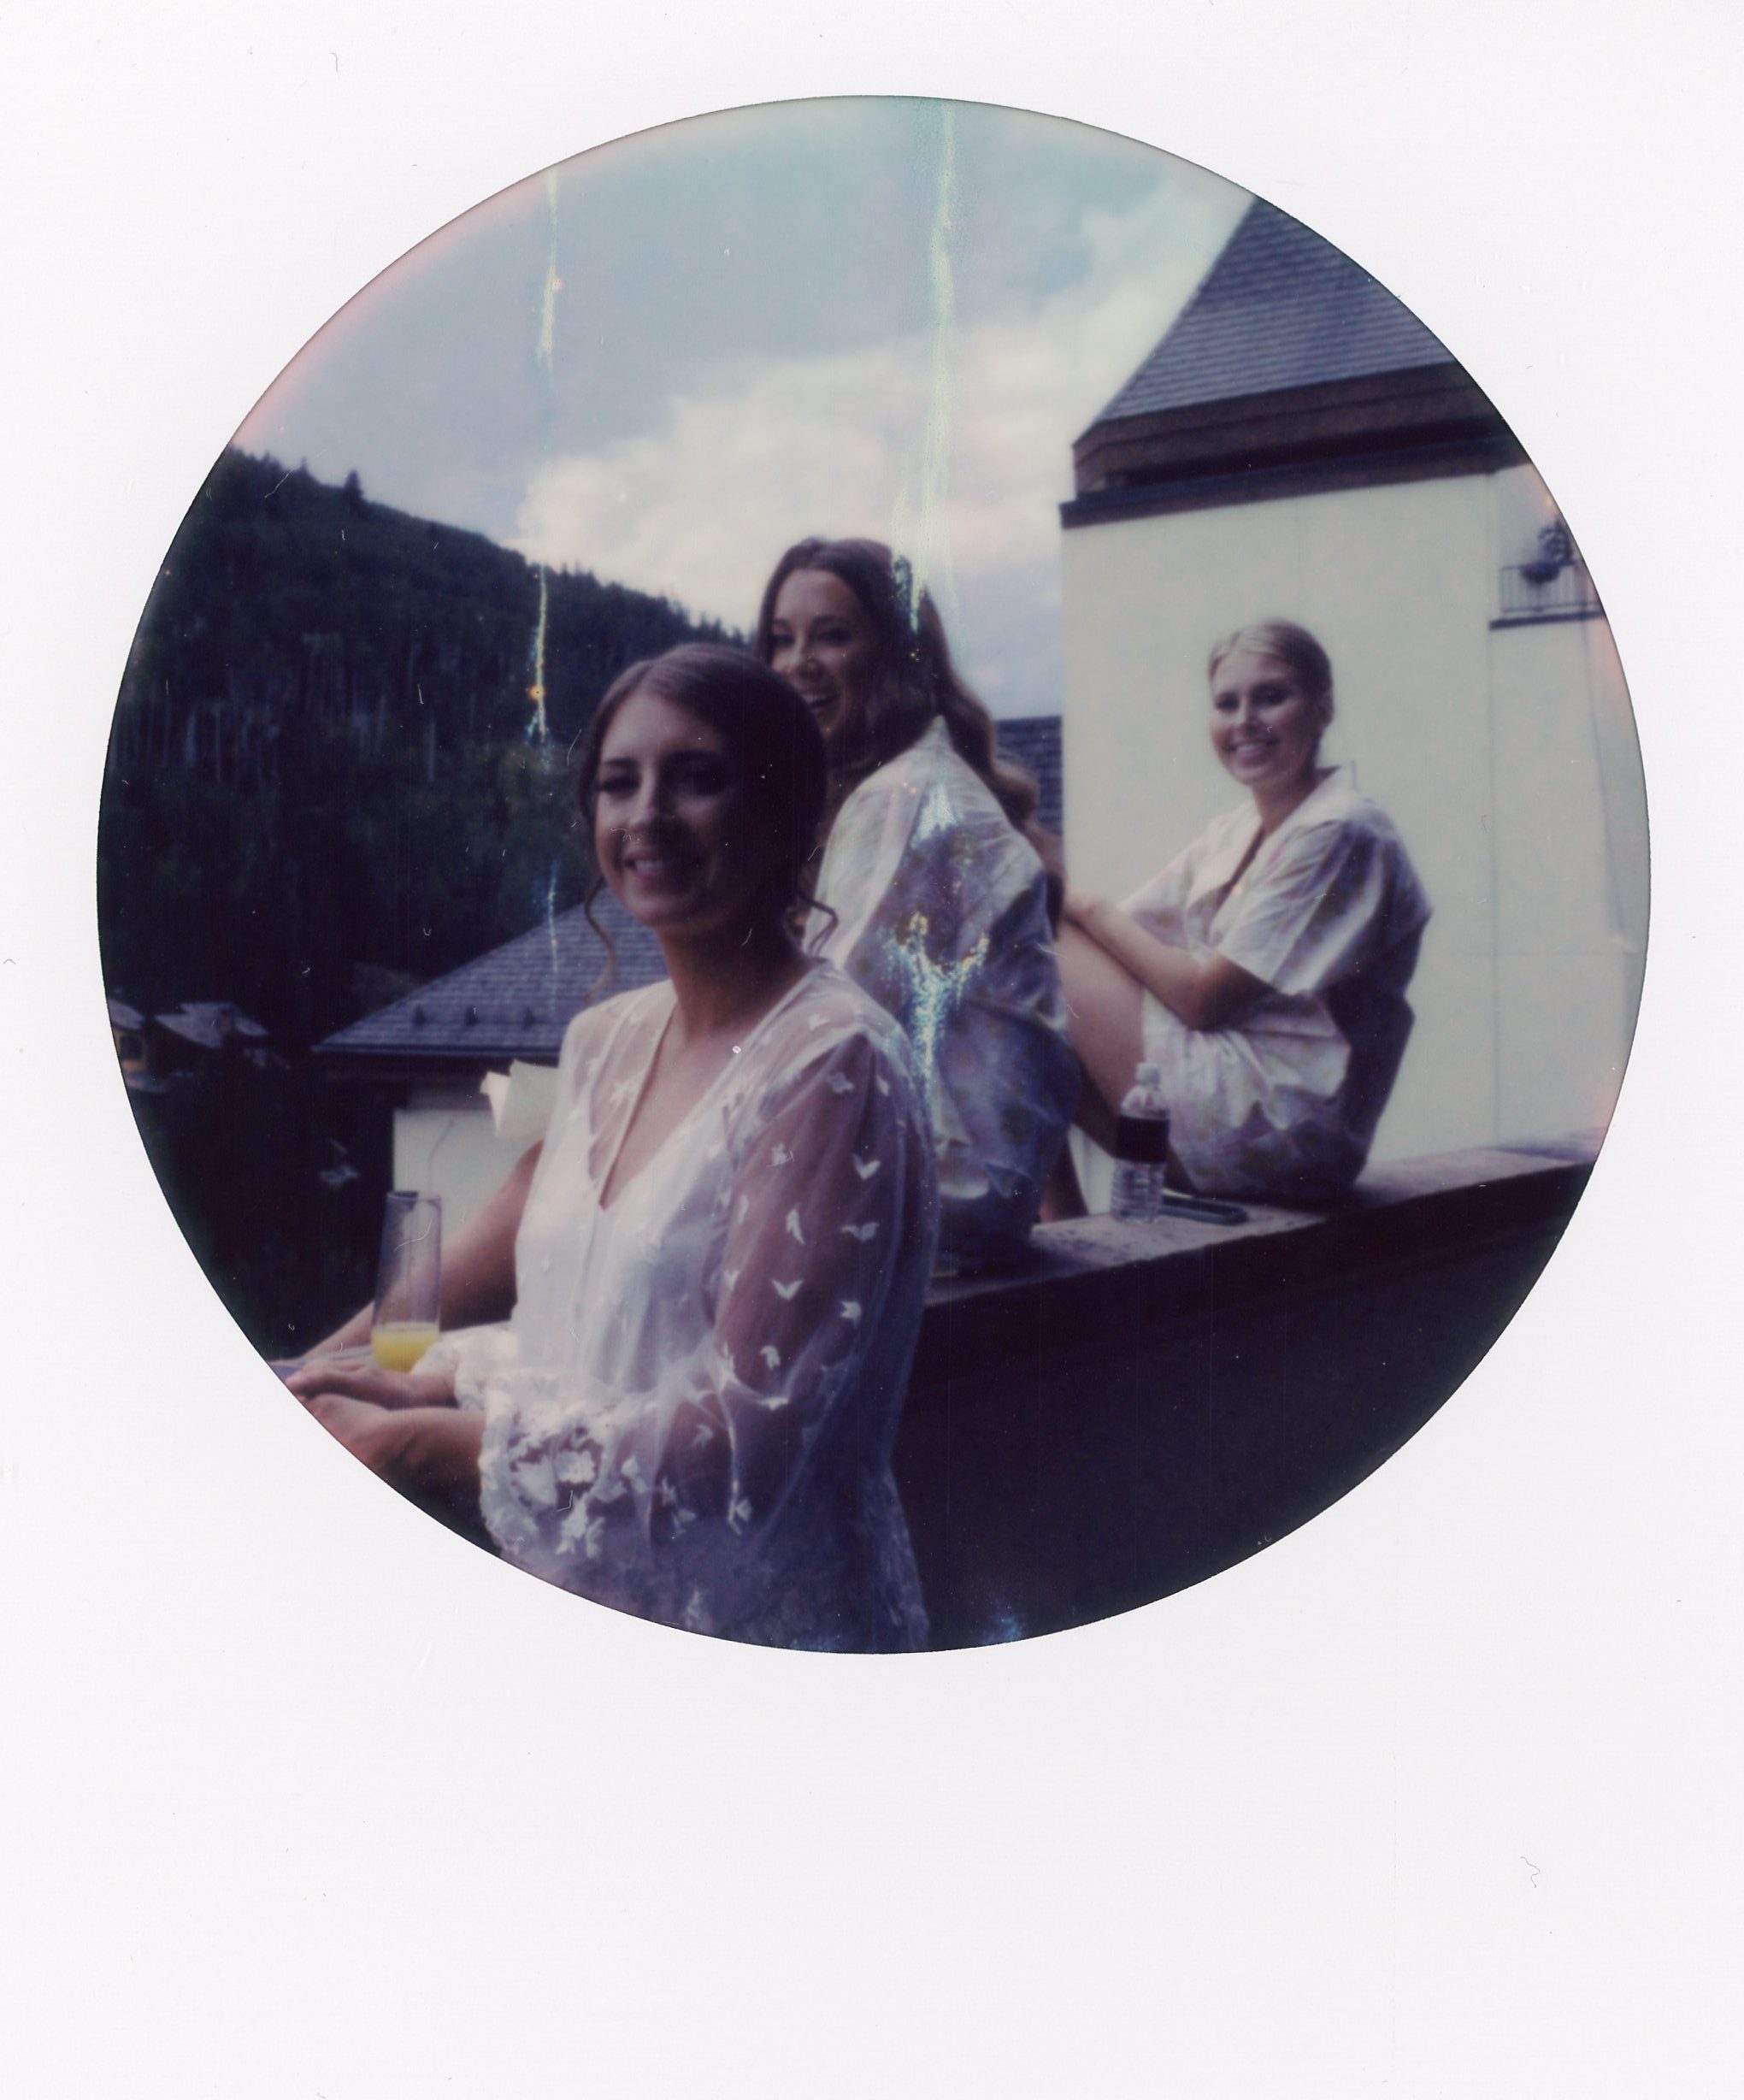 Three girls sit on a rooftop in Vail. Bridal polaroid portraits taken in Colorado by Stephanie Mikuls Photography, a wedding photographer based in Colorado.